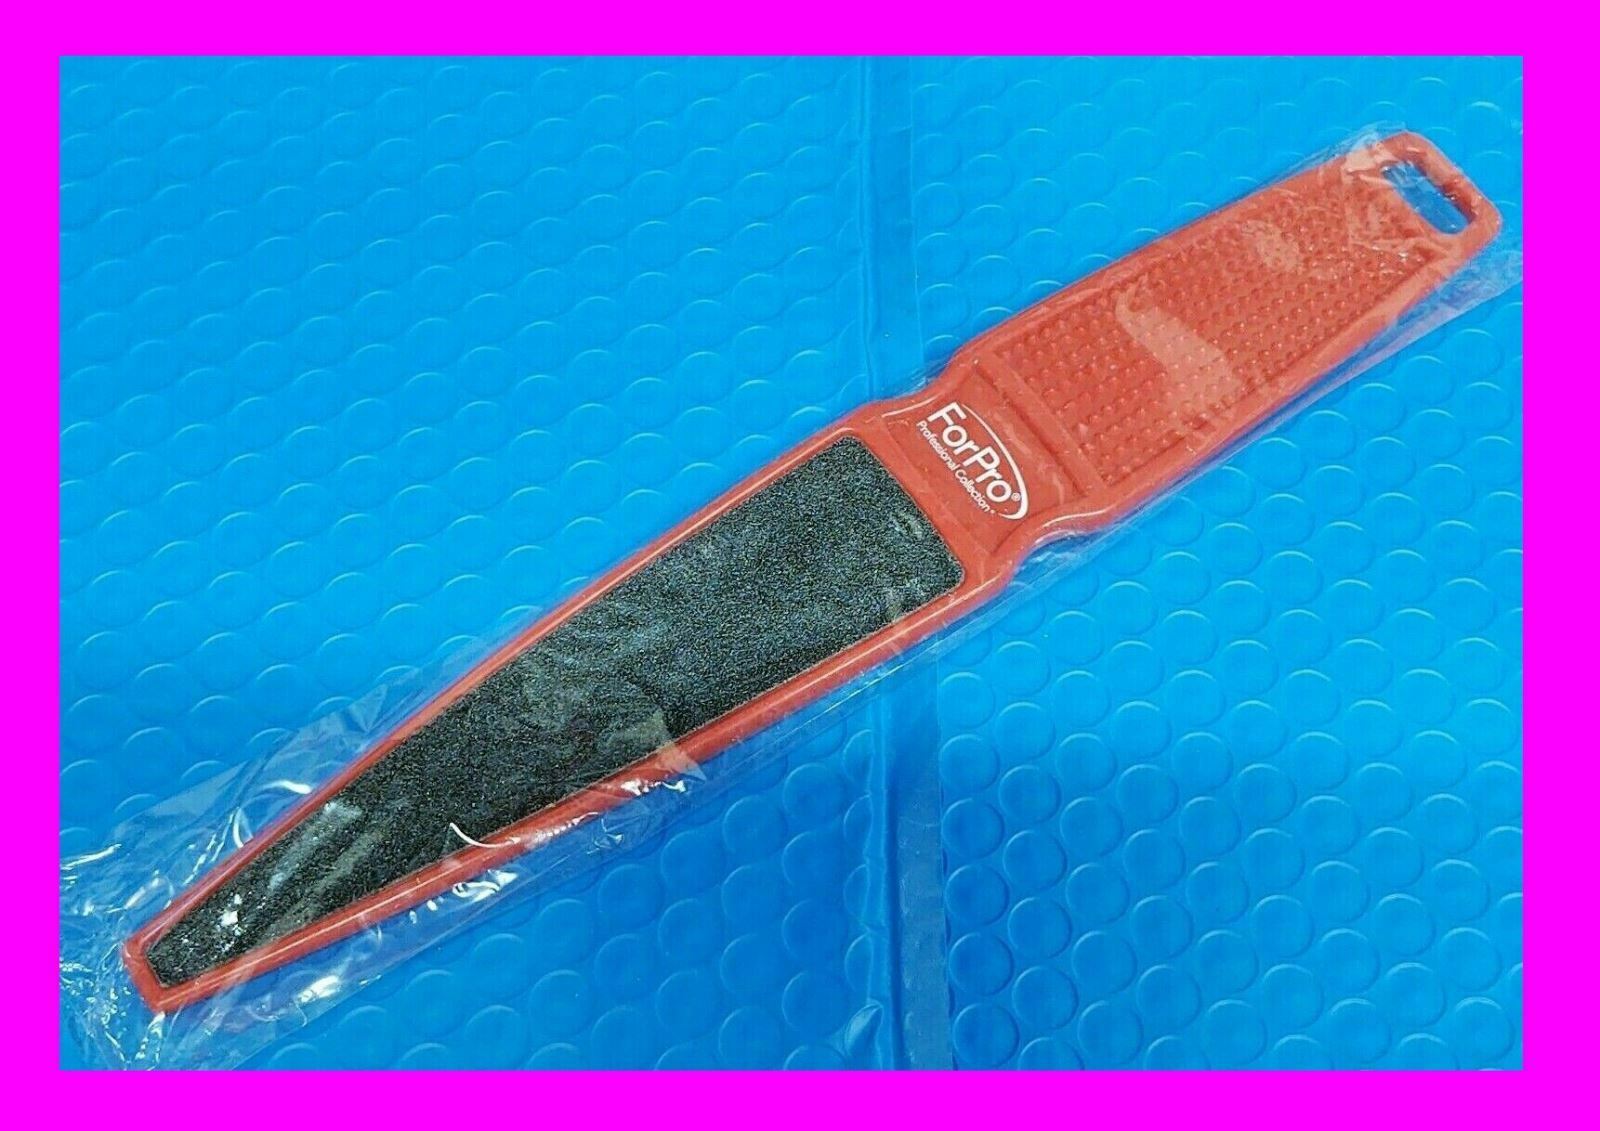 Unbranded - Paddle foot file pedicure callus & dead skin remover heel 80/180 grit 2 sided!!!